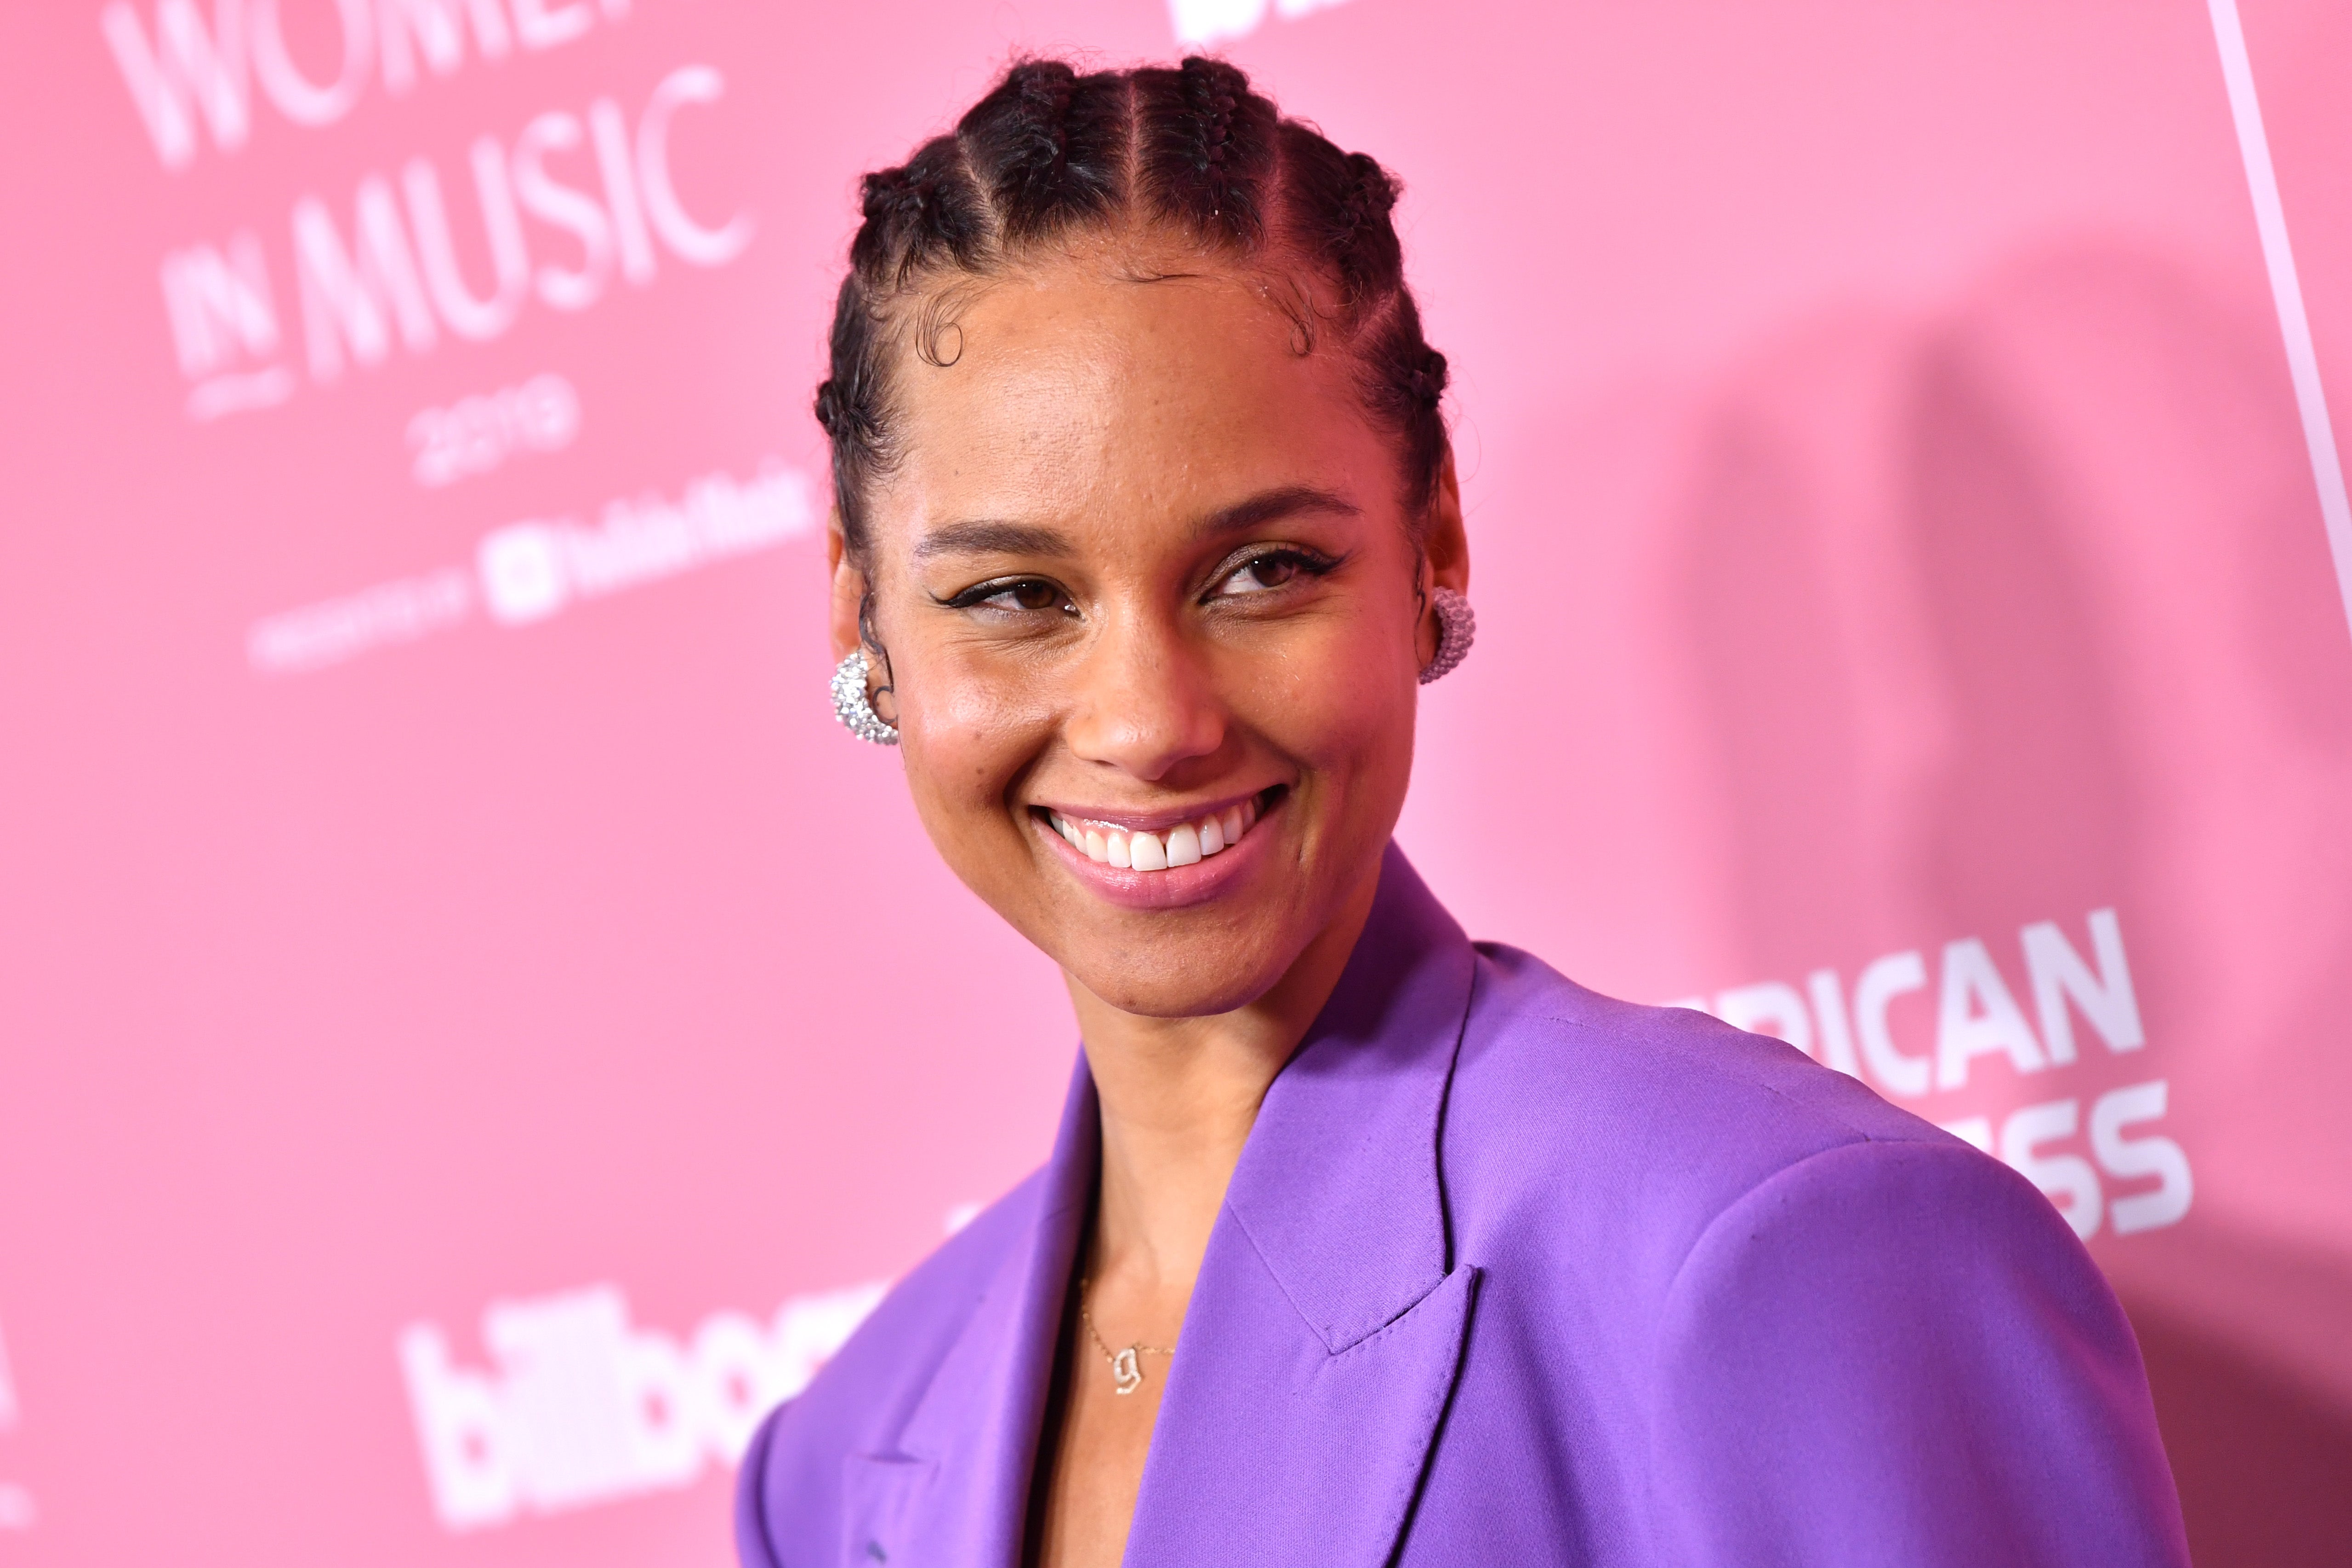 Alicia Keys says shes always felt royal when she wears her hair in braids The Independent